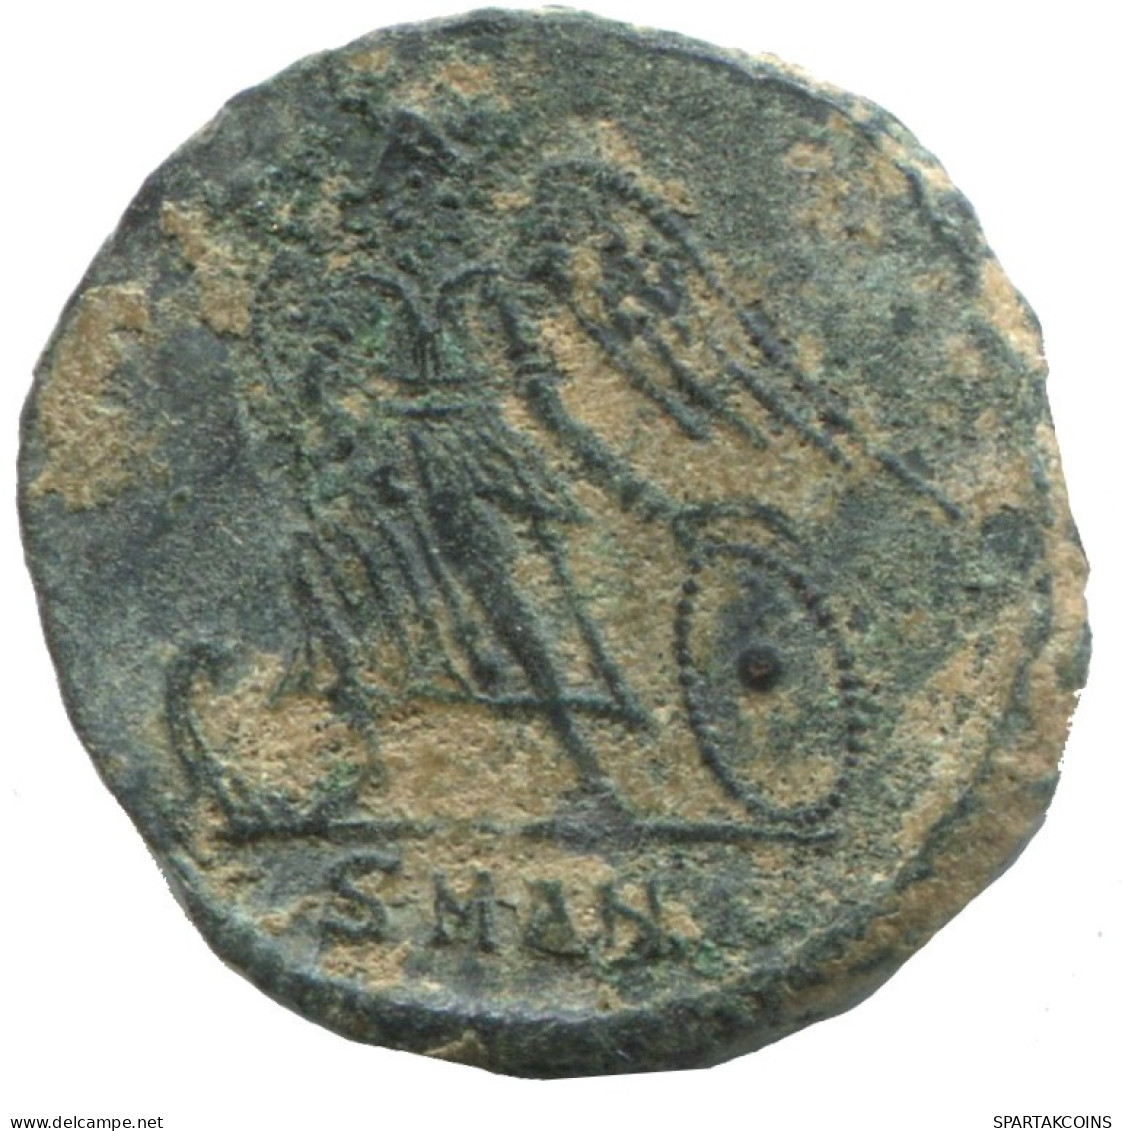 CONSTANTINOPOLIS ANTIOCH SMANI VICTORY 1.6g/16mm #ANN1203.9.F.A - The Christian Empire (307 AD To 363 AD)